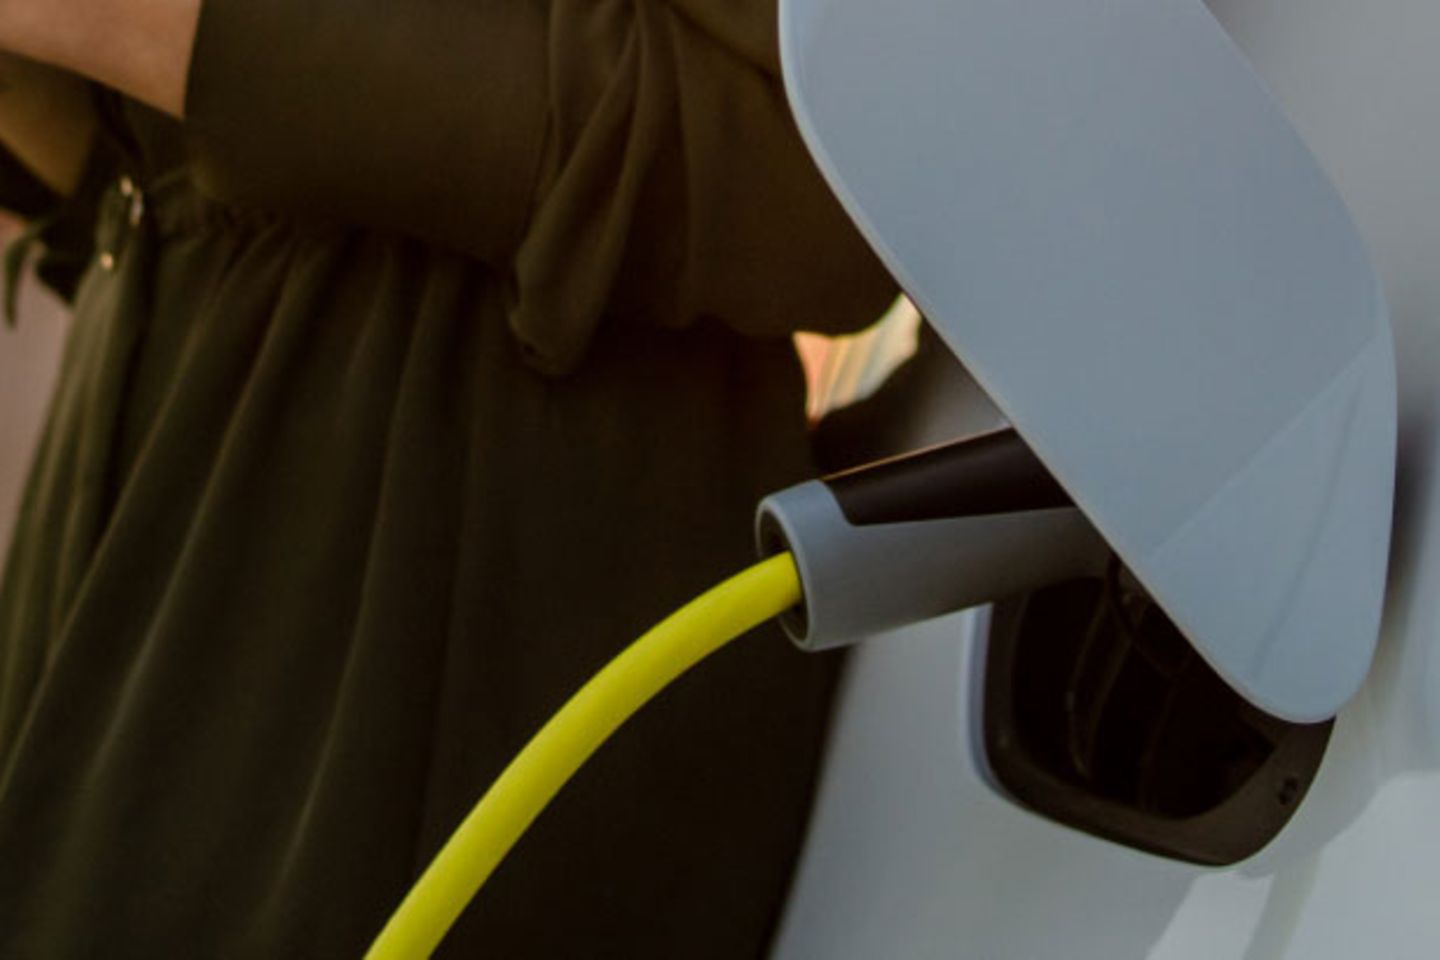 Women leaning on the car while Electric Car is Charging